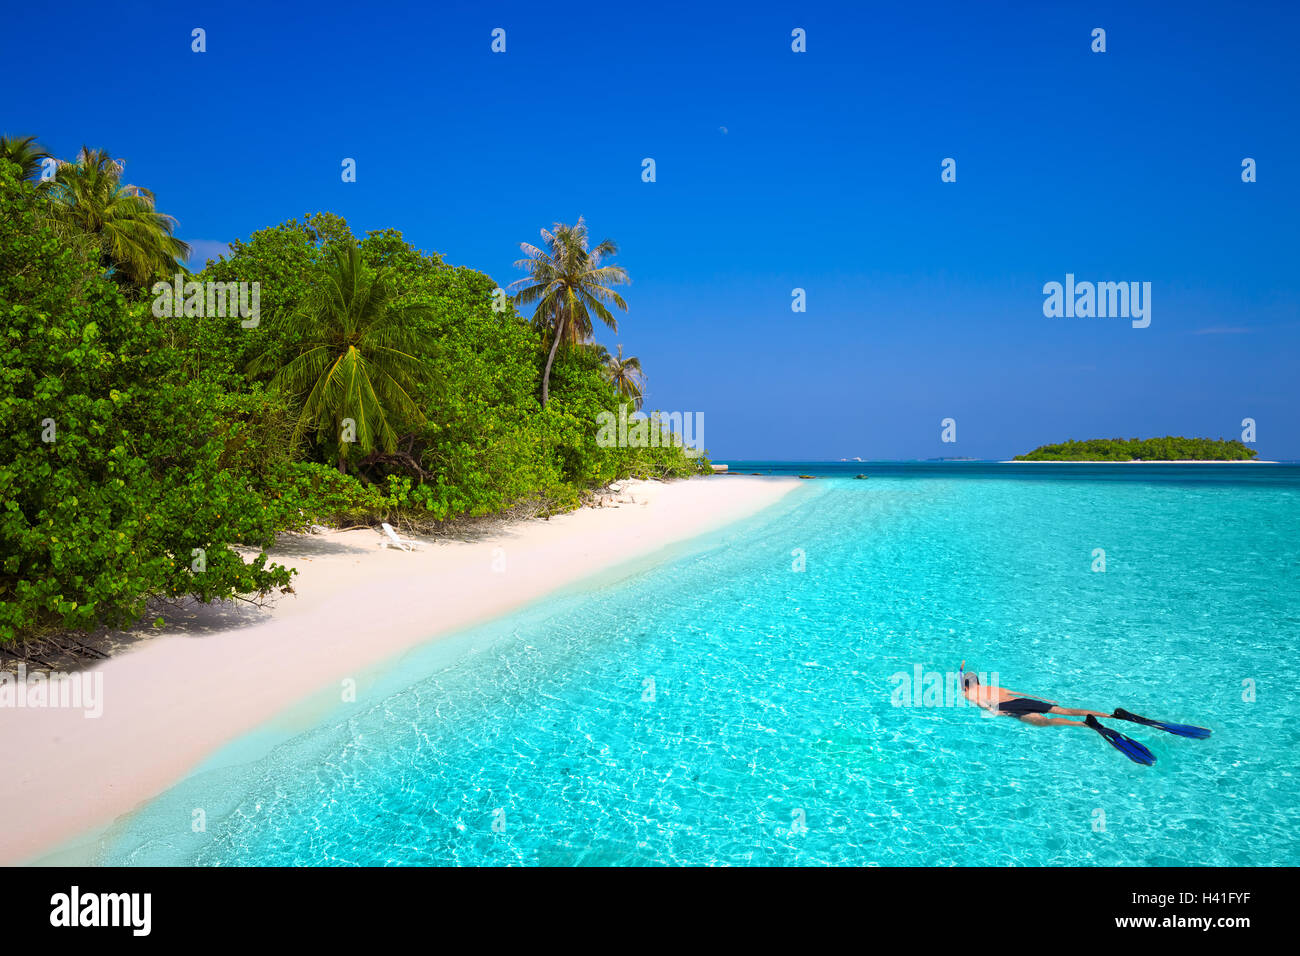 Young man snorkling in tropical island with sandy beach, palm trees and turquoise clear water Stock Photo